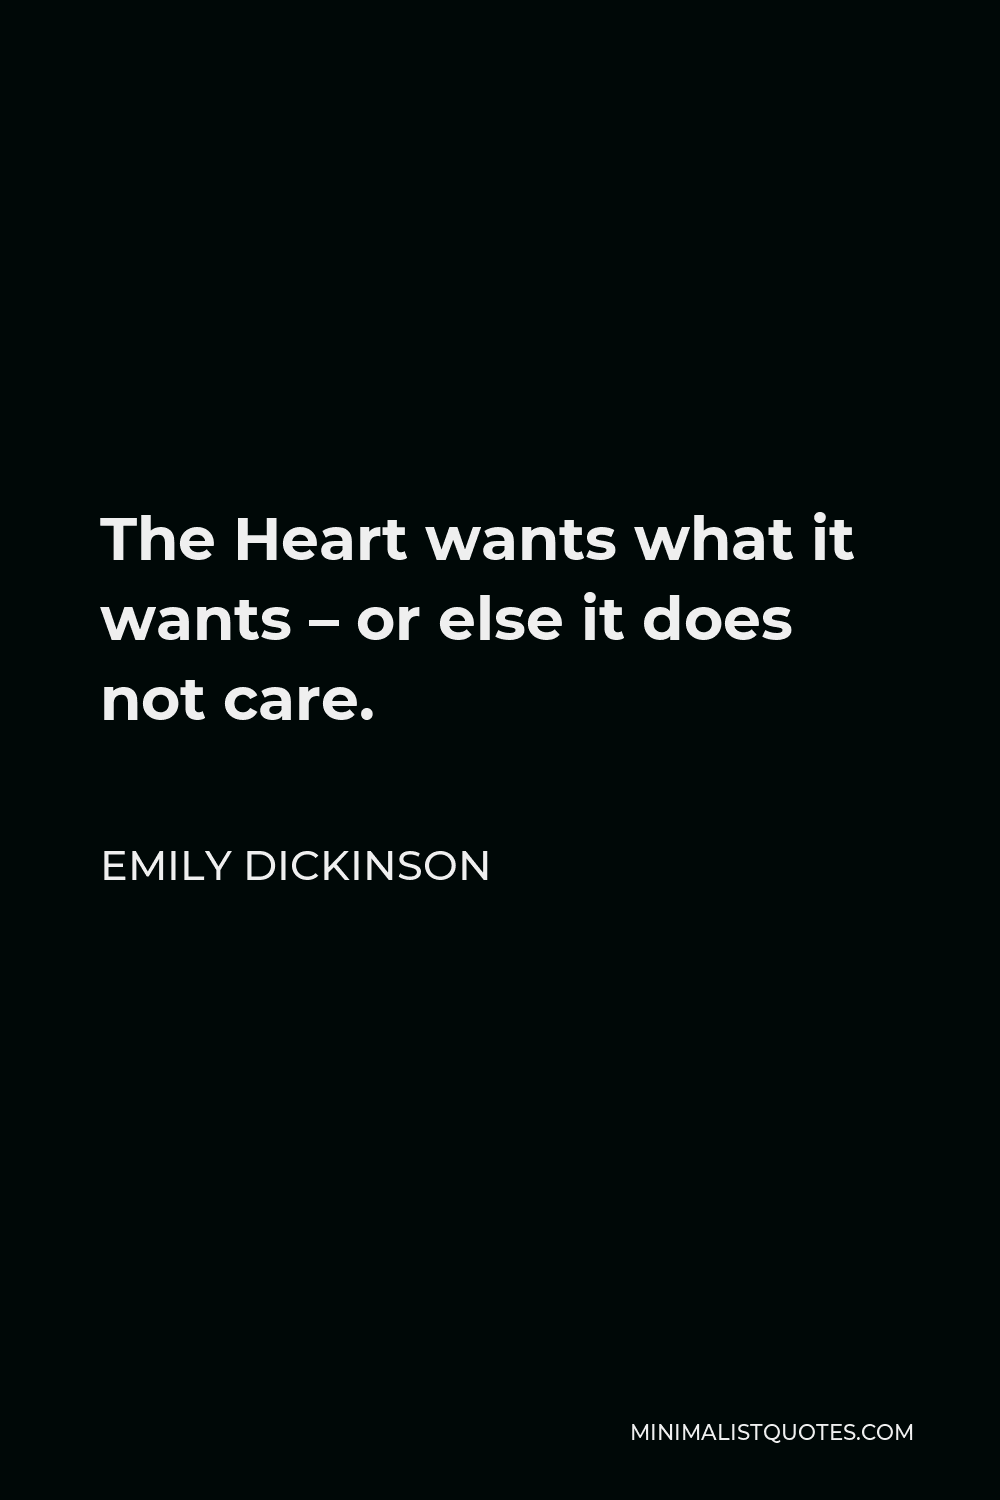 Emily Dickinson Quote - The Heart wants what it wants – or else it does not care.